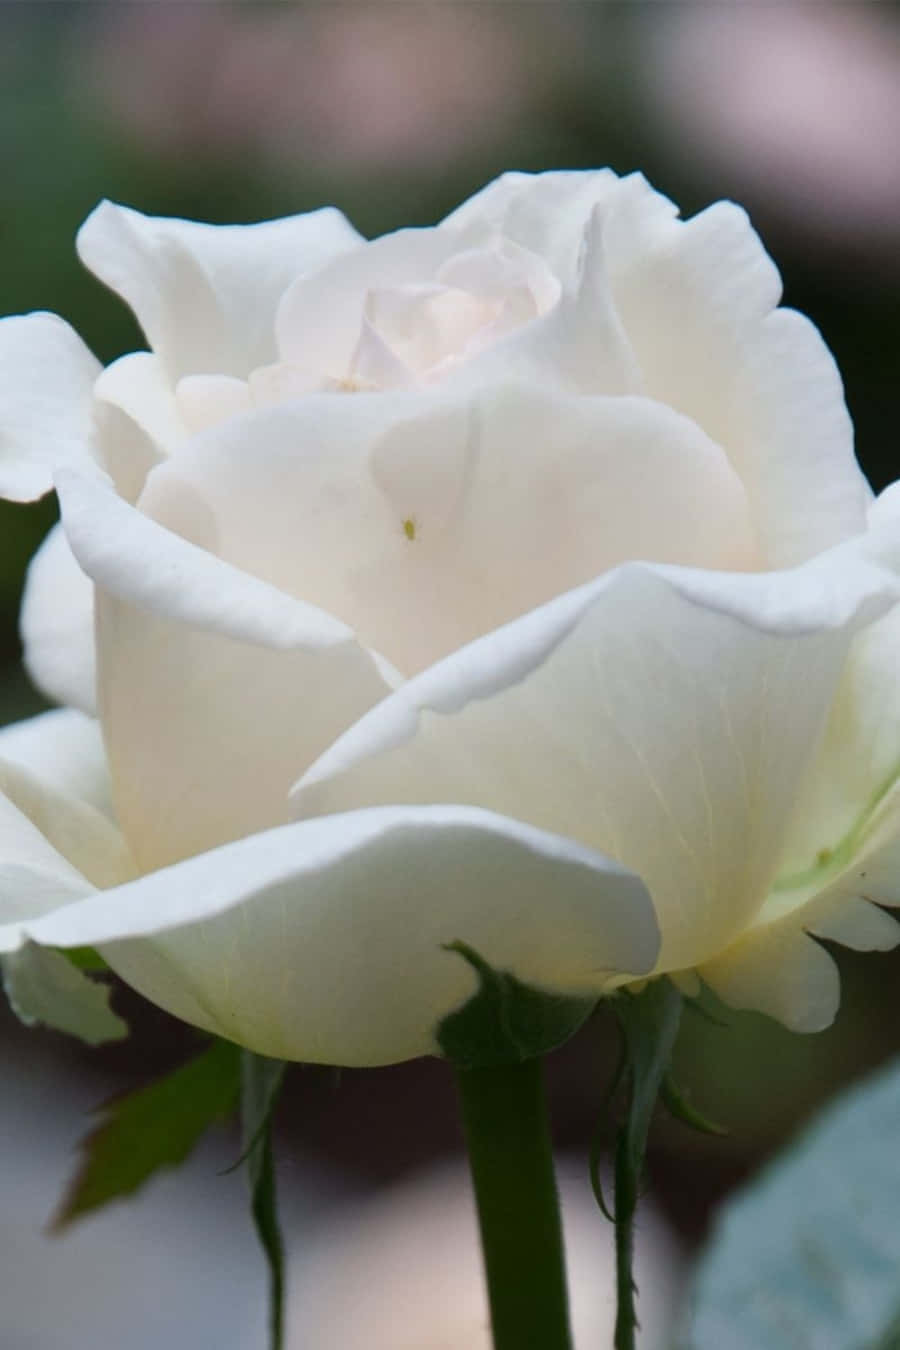 Here is a beautiful bunch of white roses in a reflective phone case. Wallpaper